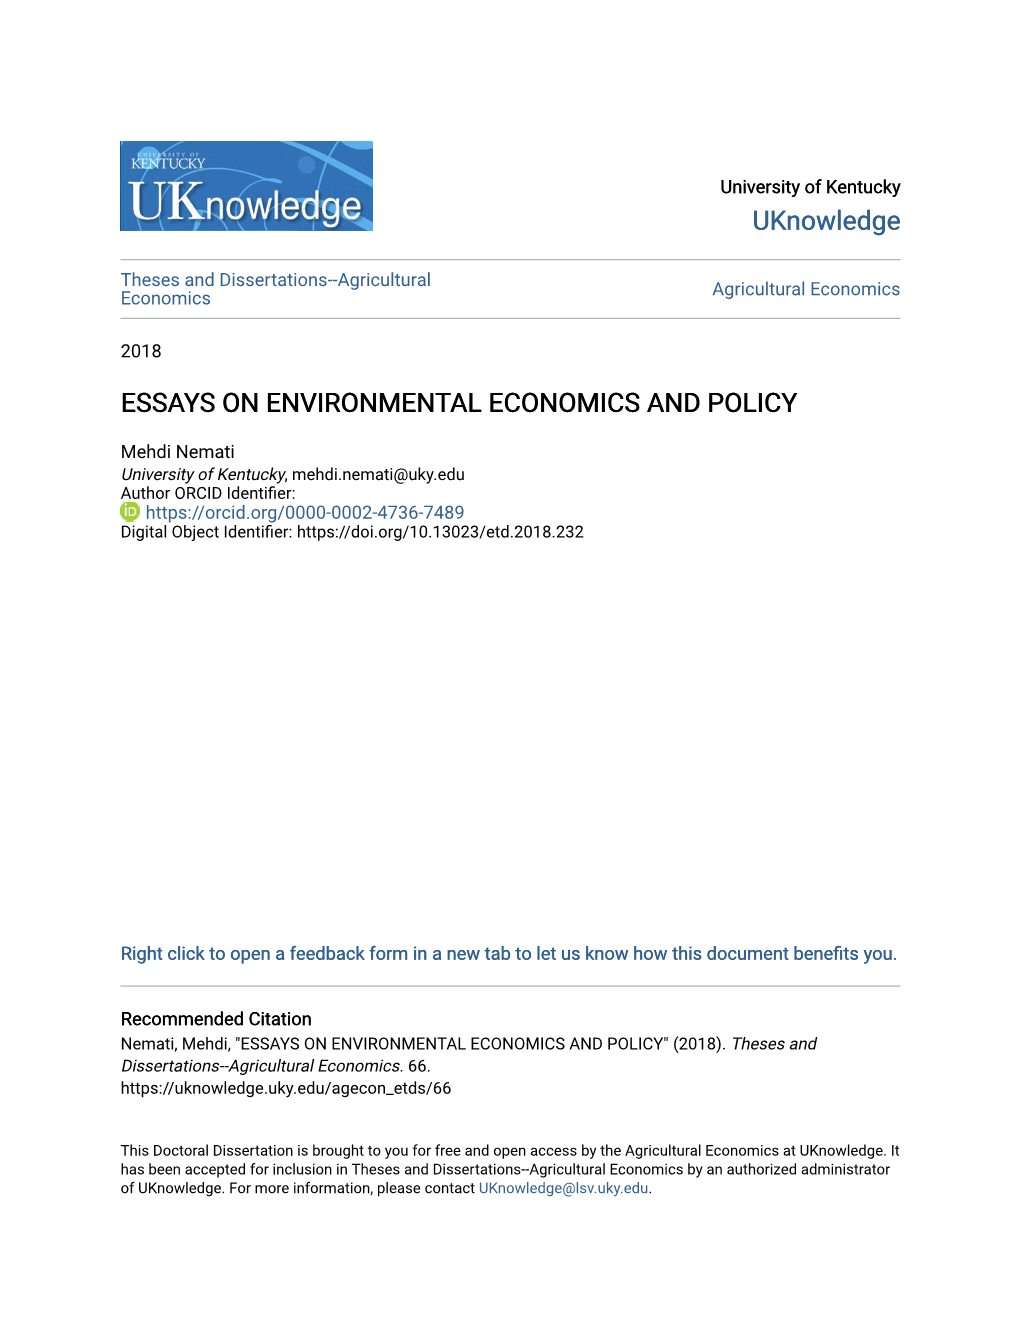 Essays on Environmental Economics and Policy